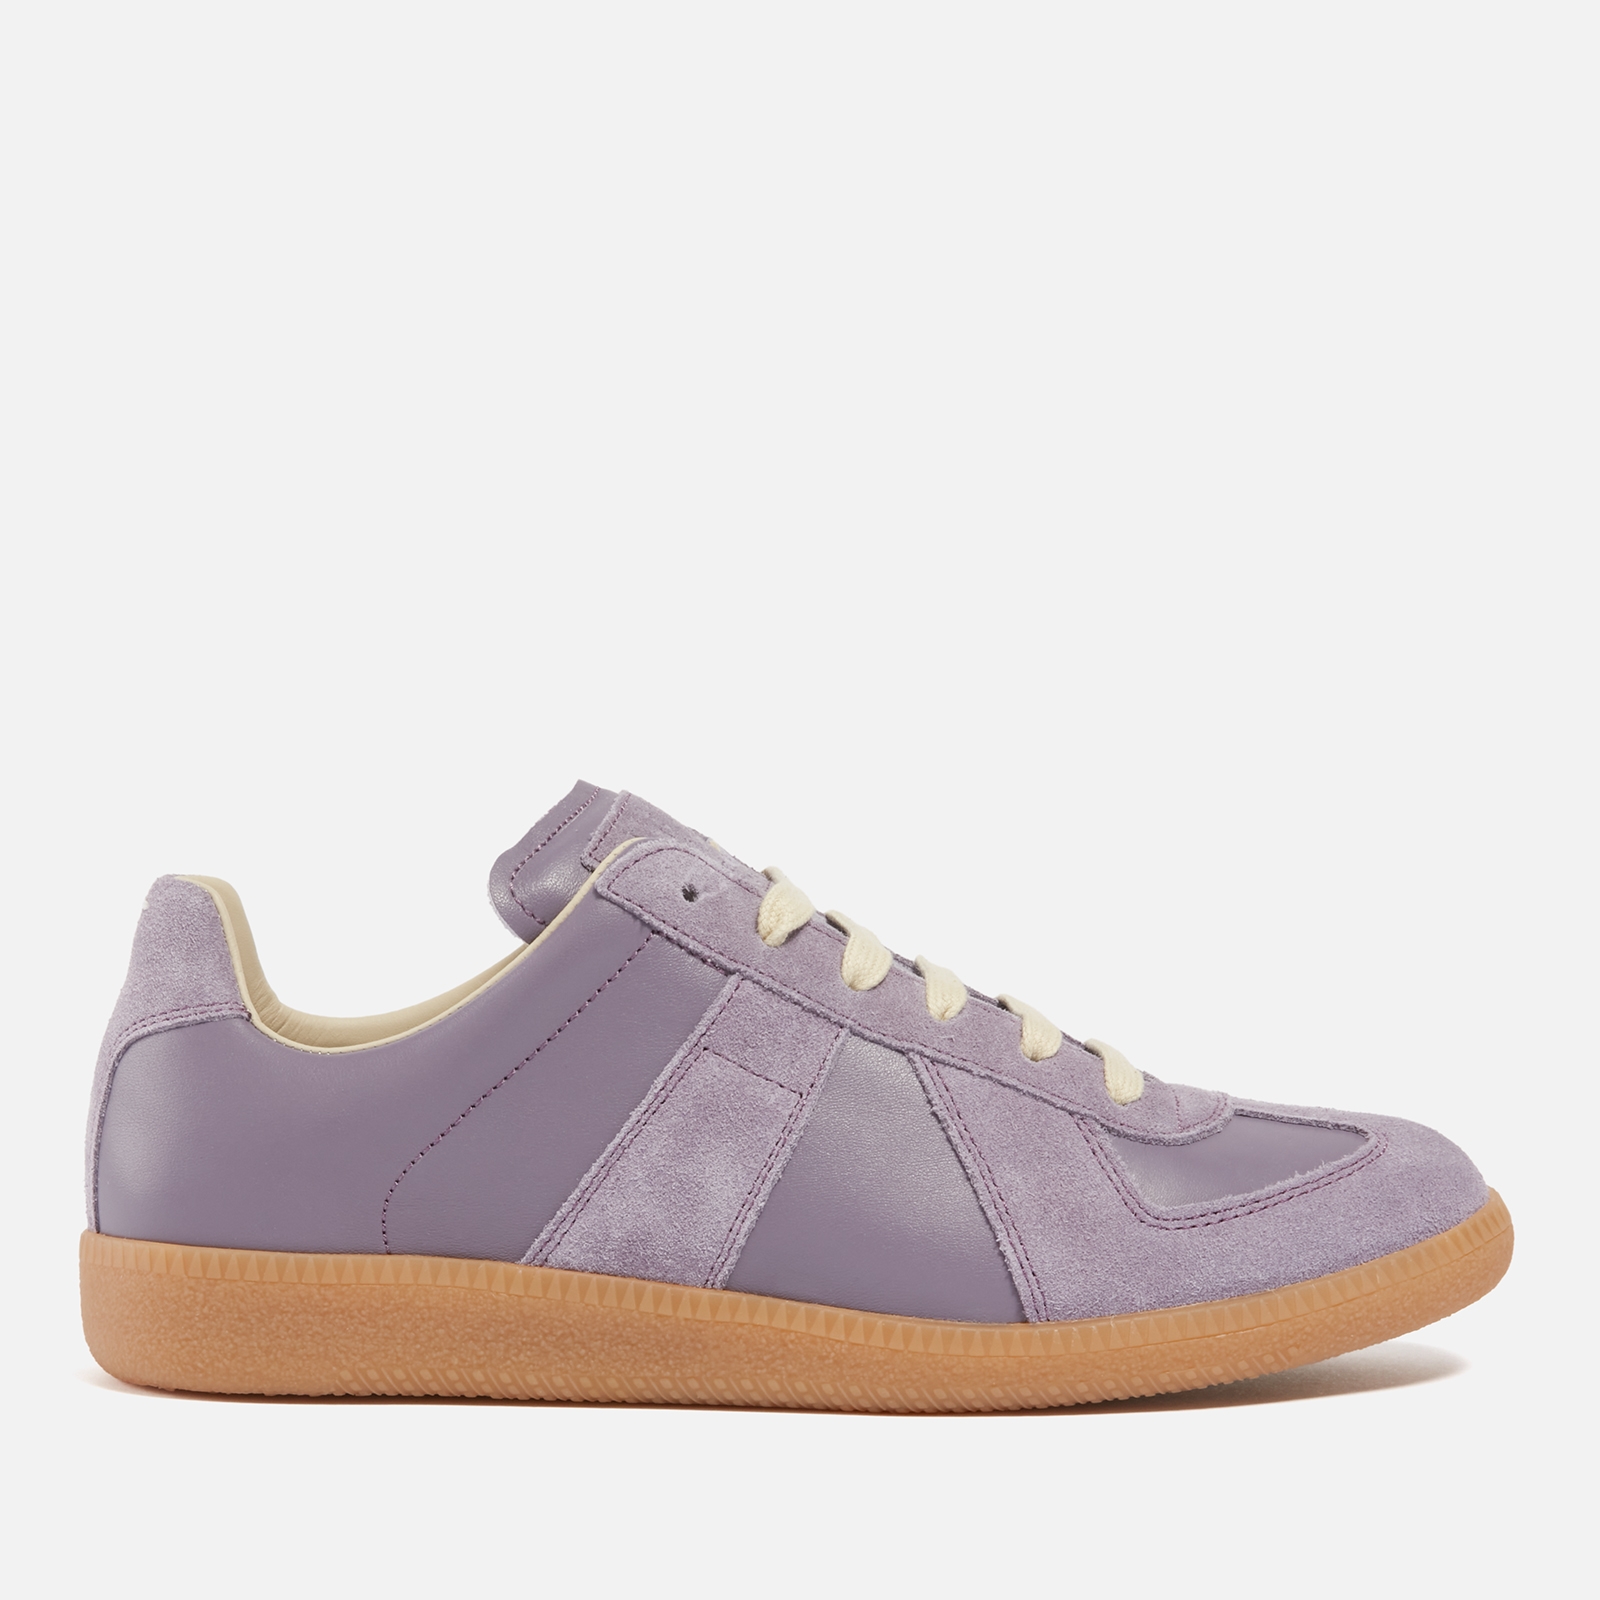 Maison Margiela Women's Suede and Leather Replica Trainers - UK 7